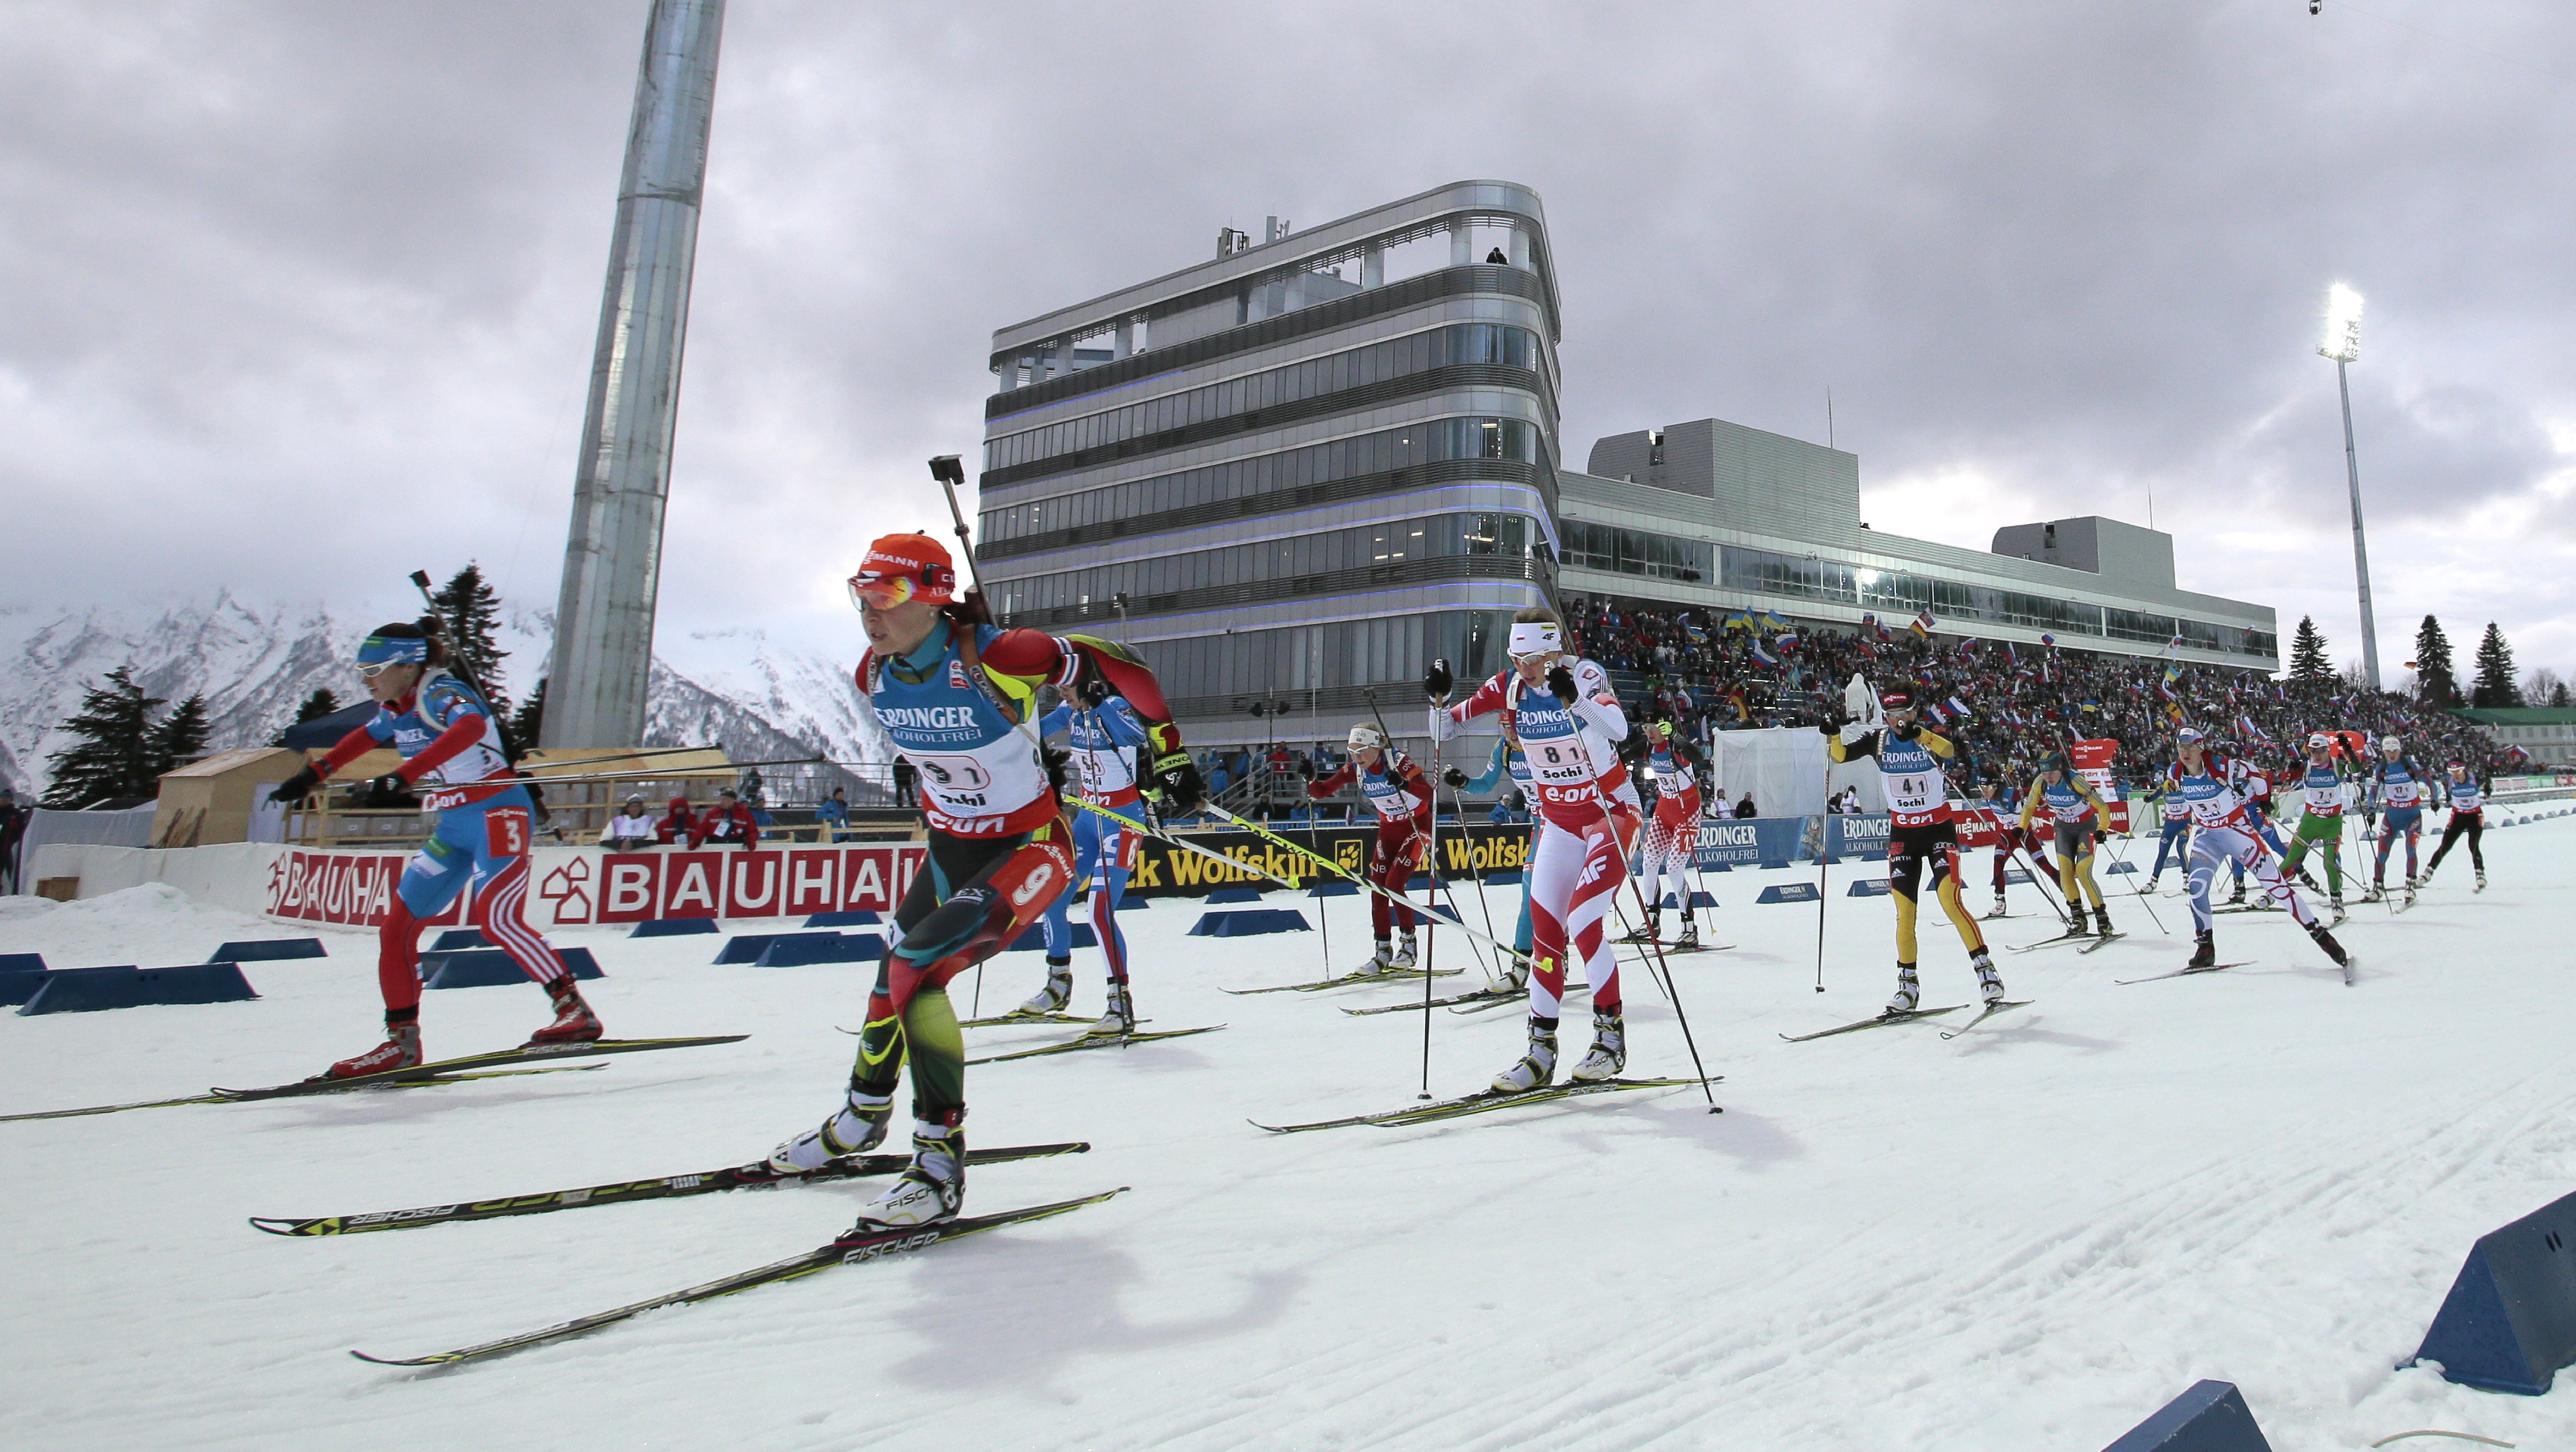 In a 2013 file photo, competitors race during the women's 4x6km World Cup Biathlon relay race at the Laura biathlon stadium in Sochi, Russia. Photo:AP